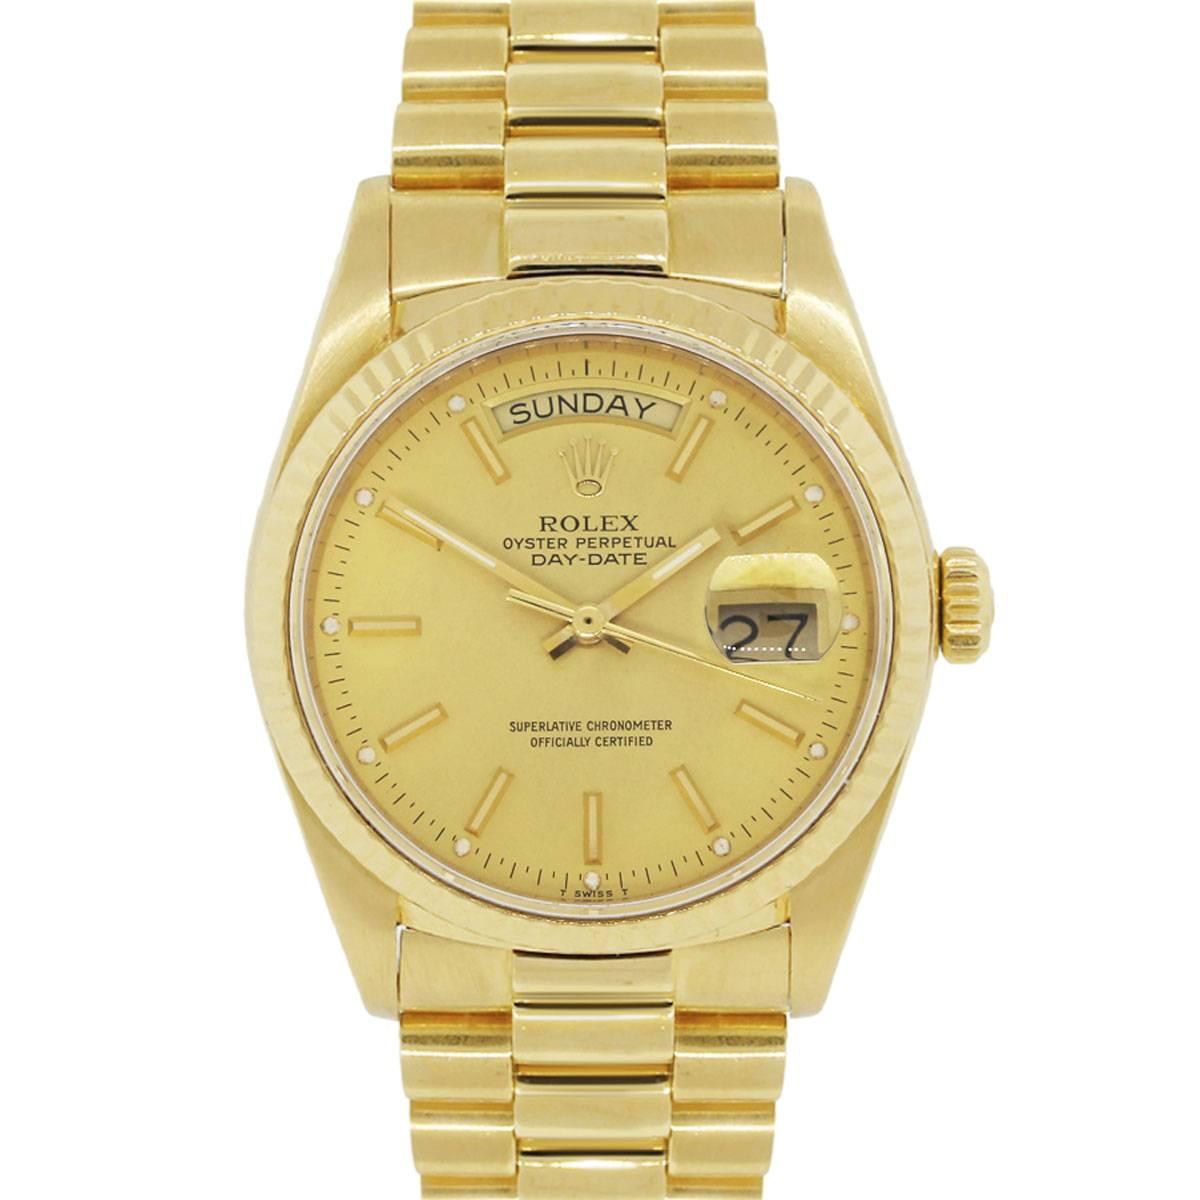 Rolex yellow gold Day Date Presidential Automatic Wristwatch Ref 18038 